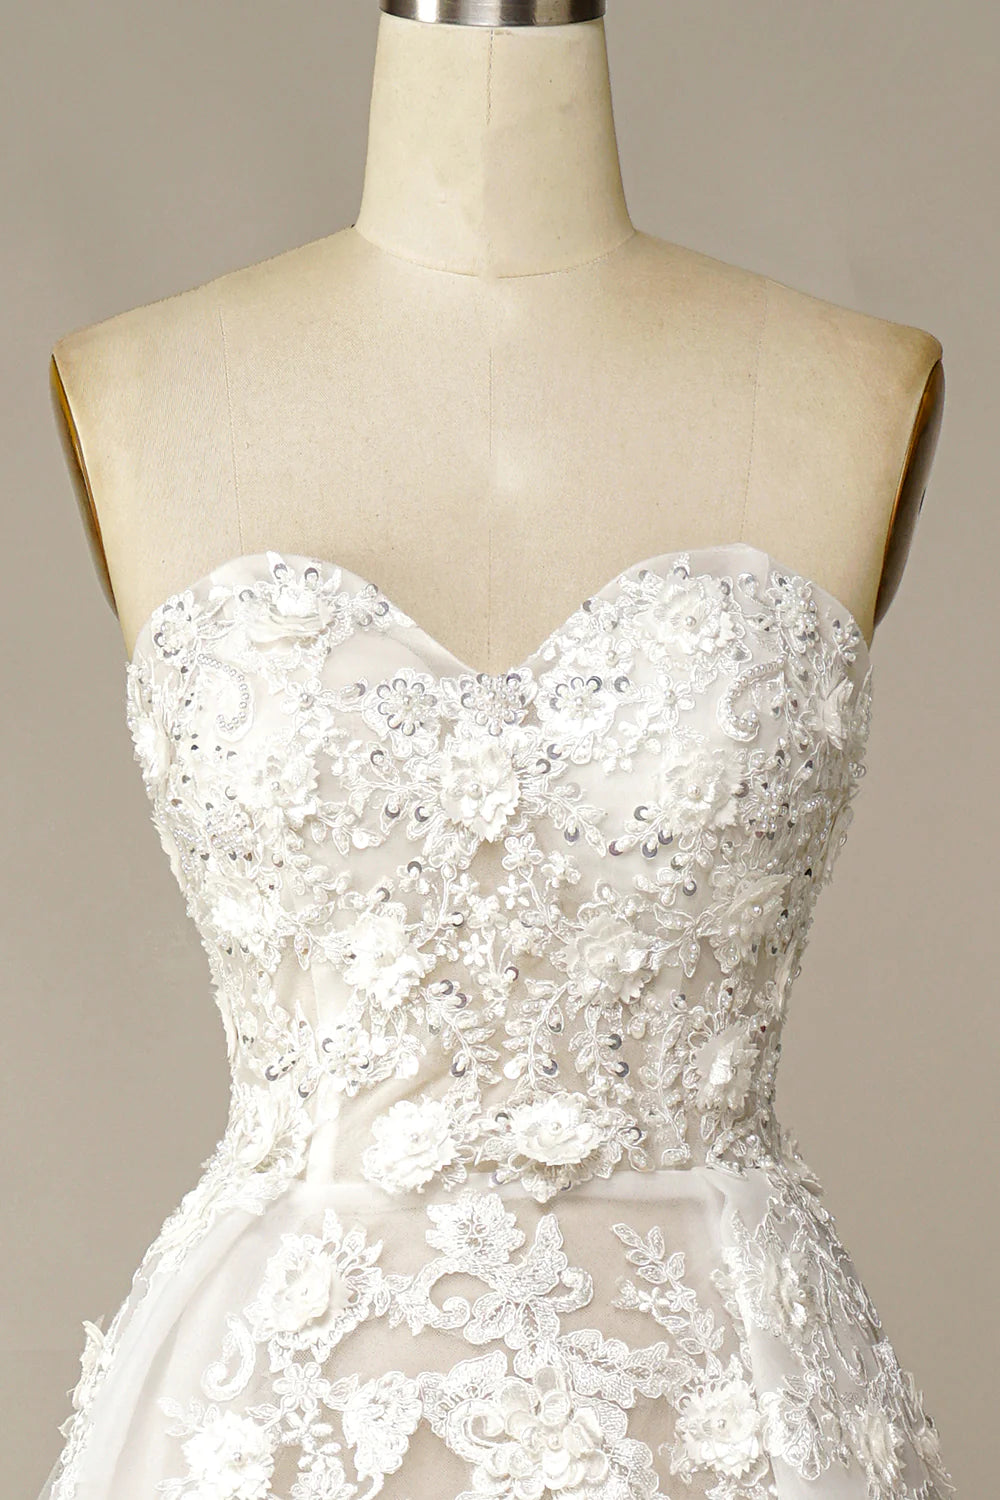 White A Line Strapless Train Dress Wedding Dress with Appliques